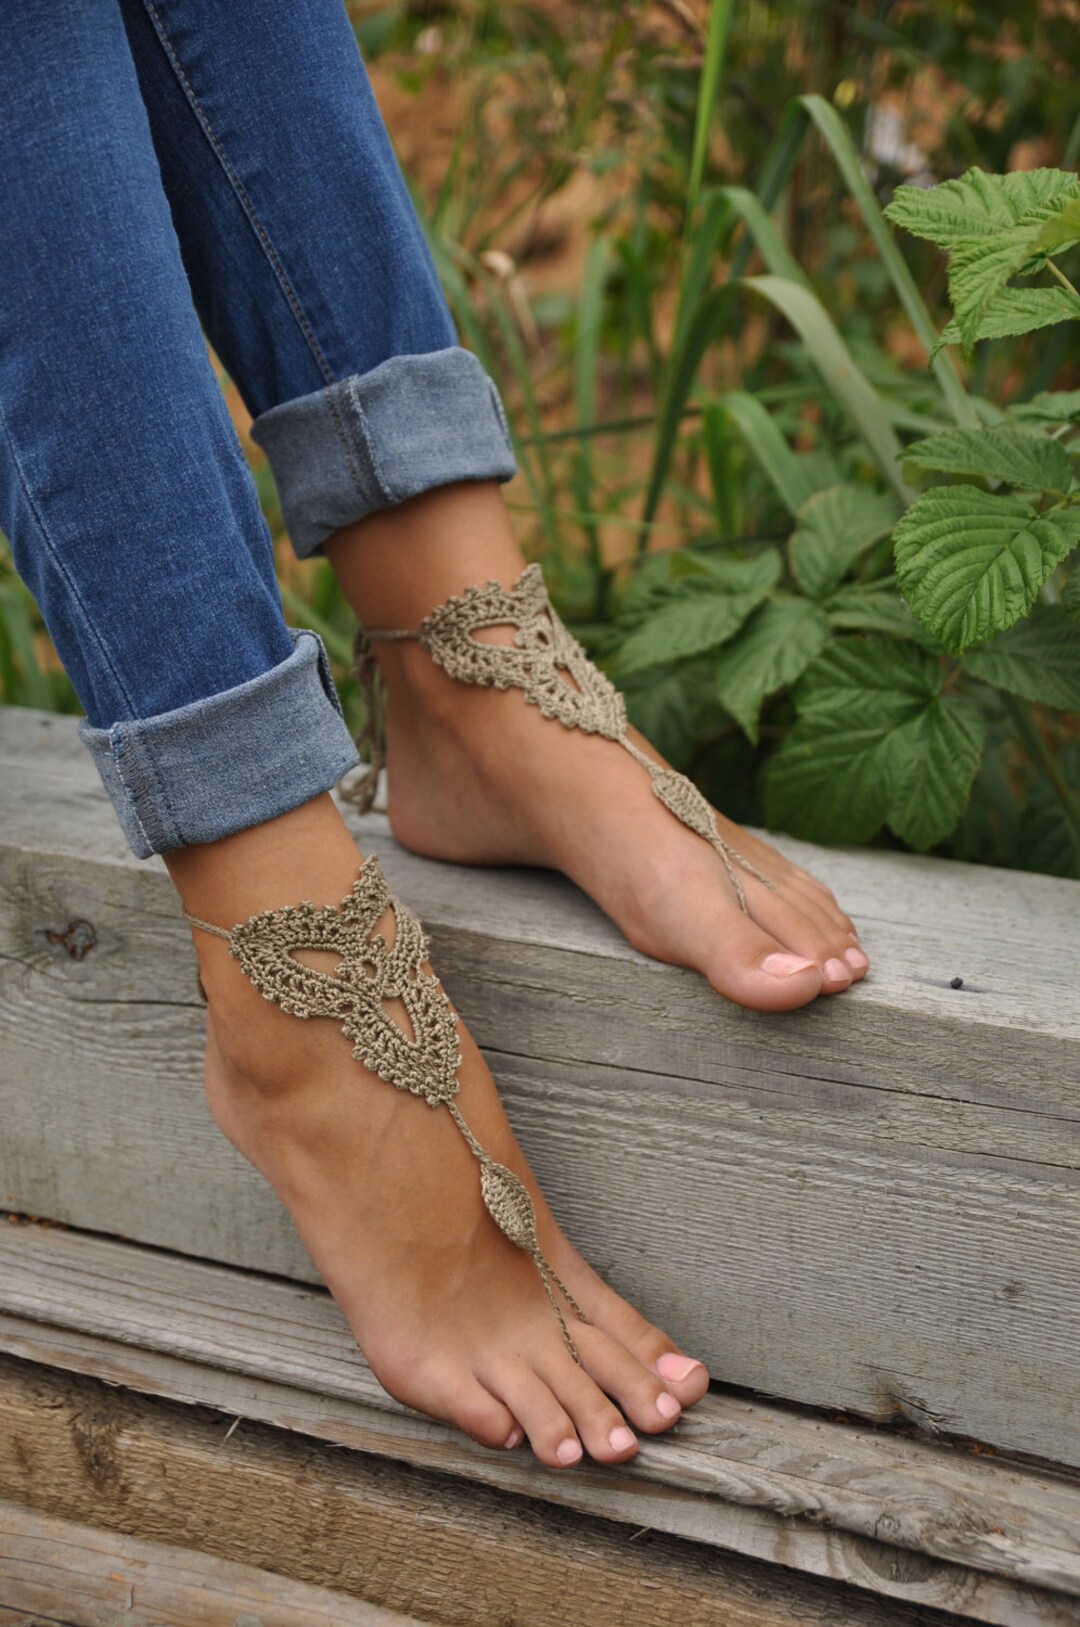 Crochet Tan Barefoot Sandals Taupe Nude Shoes Foot Jewelry image image